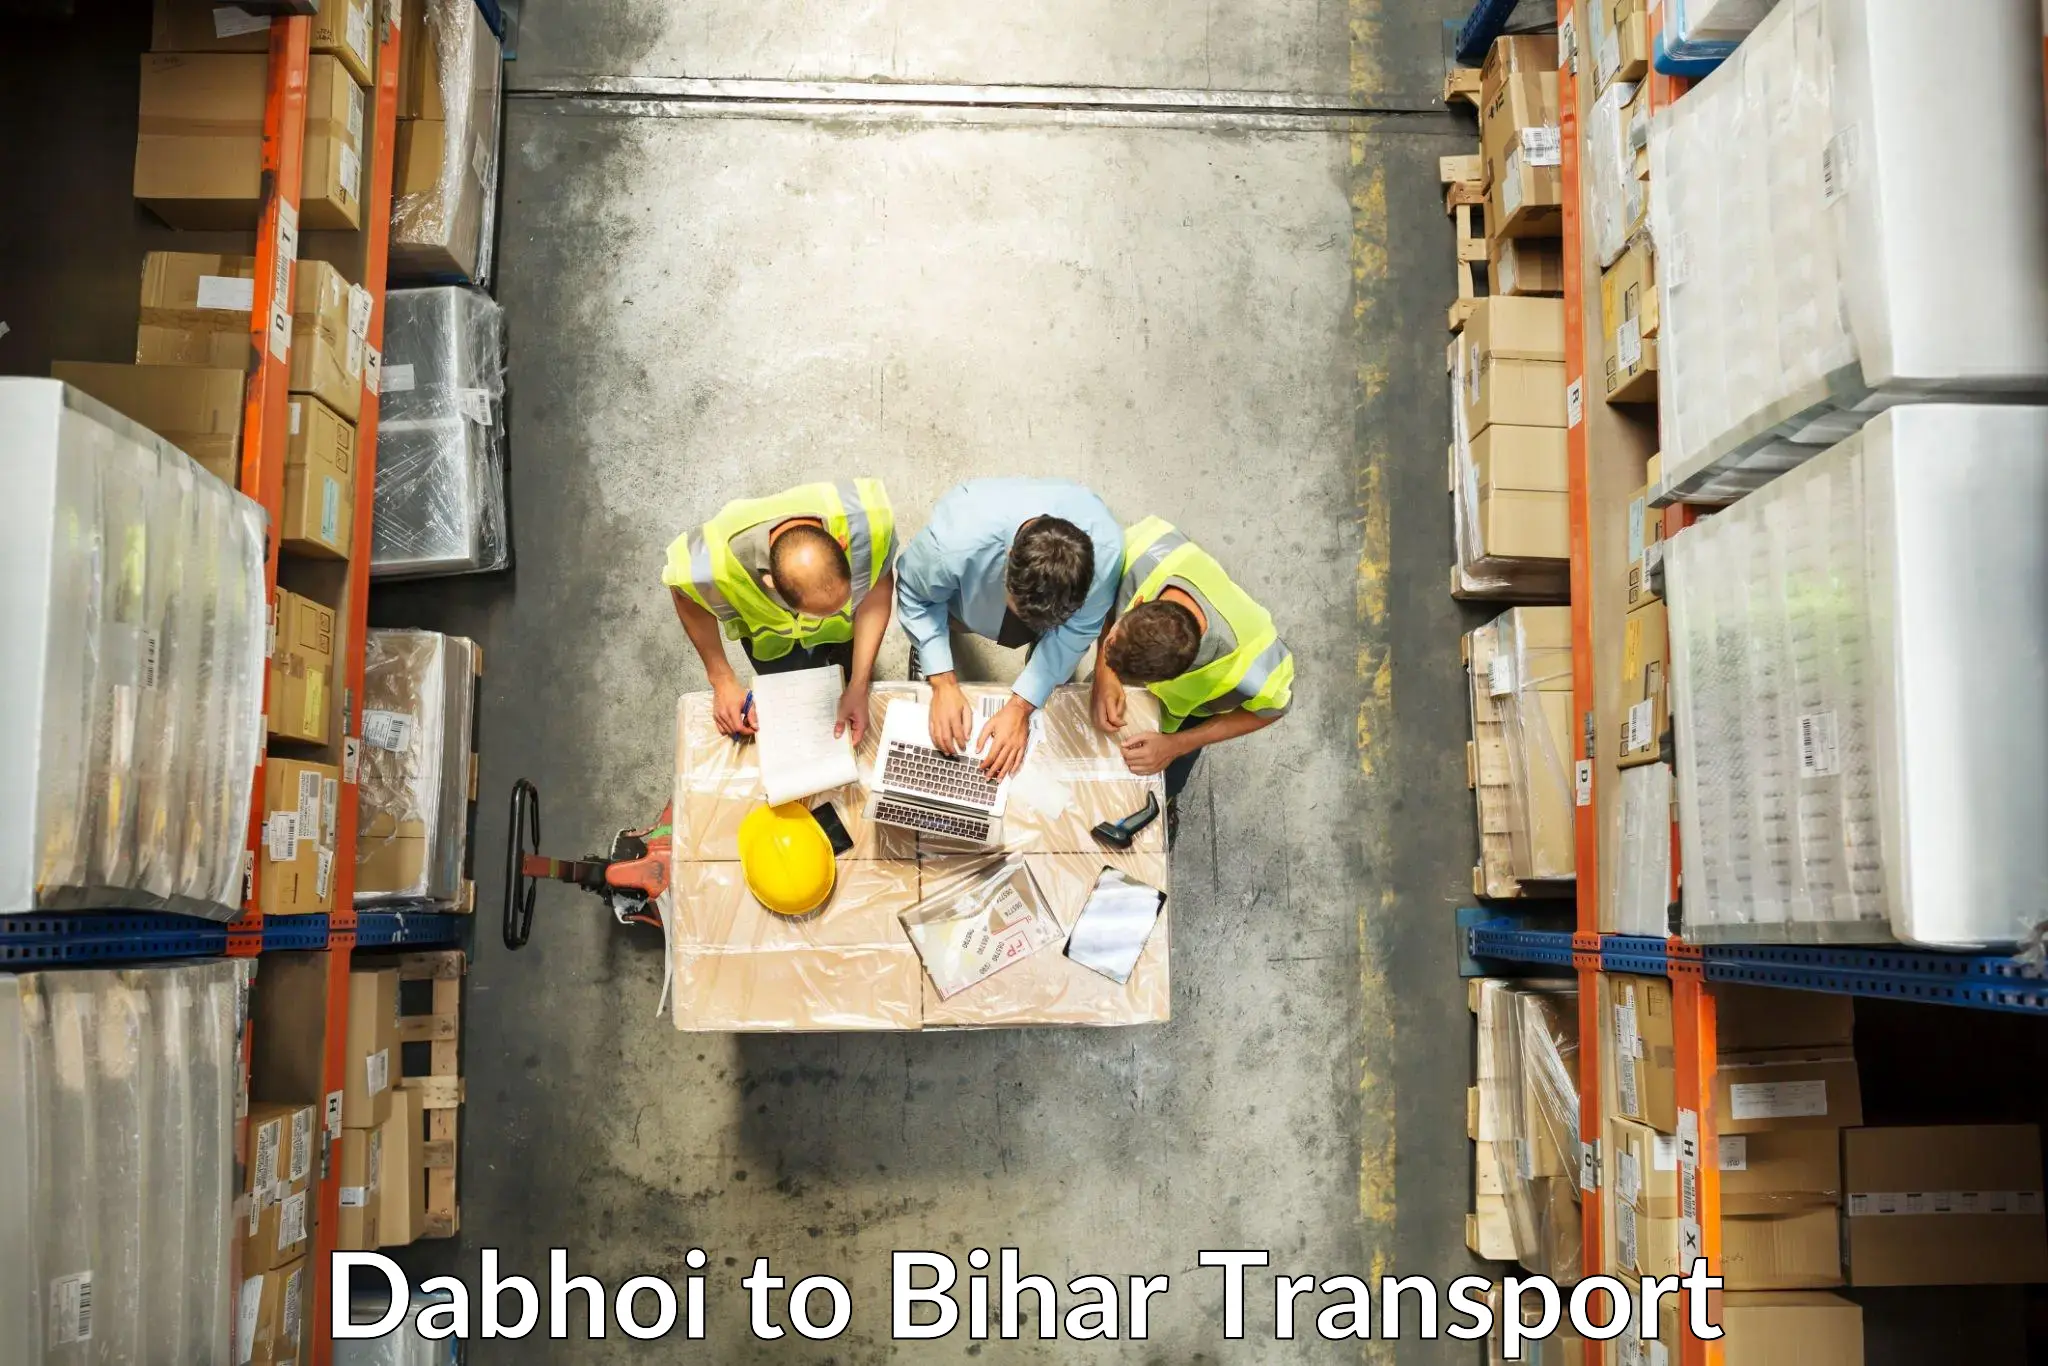 Part load transport service in India in Dabhoi to Rajgir